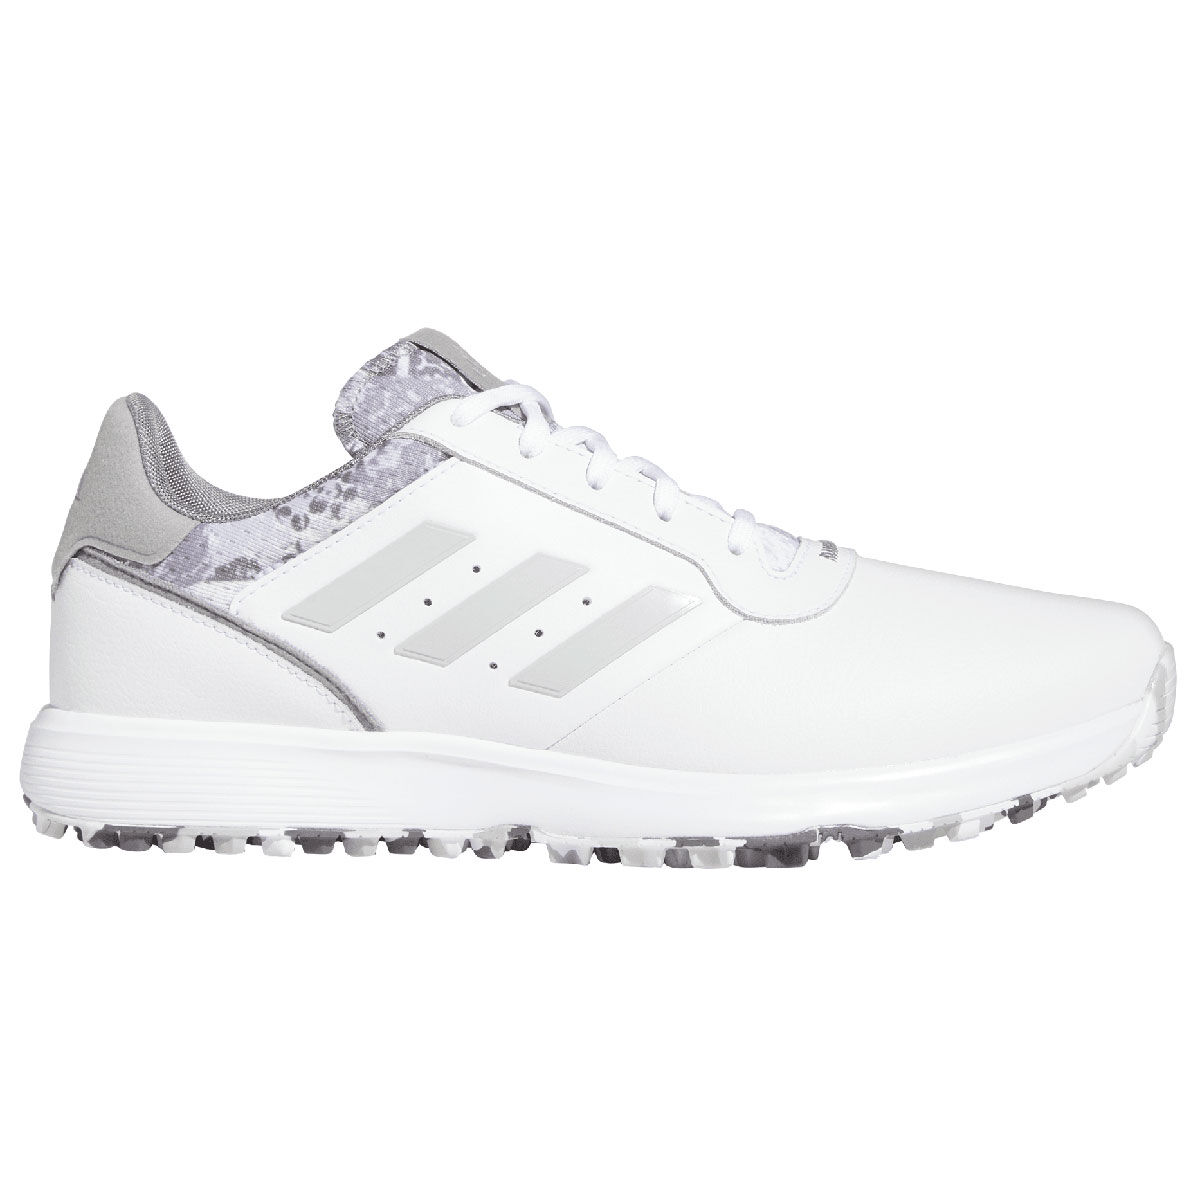 adidas Golf Mens White and Grey Lightweight S2G Leather Waterproof Spikeless Regular Fit Golf Shoes, Size: 8 | American Golf